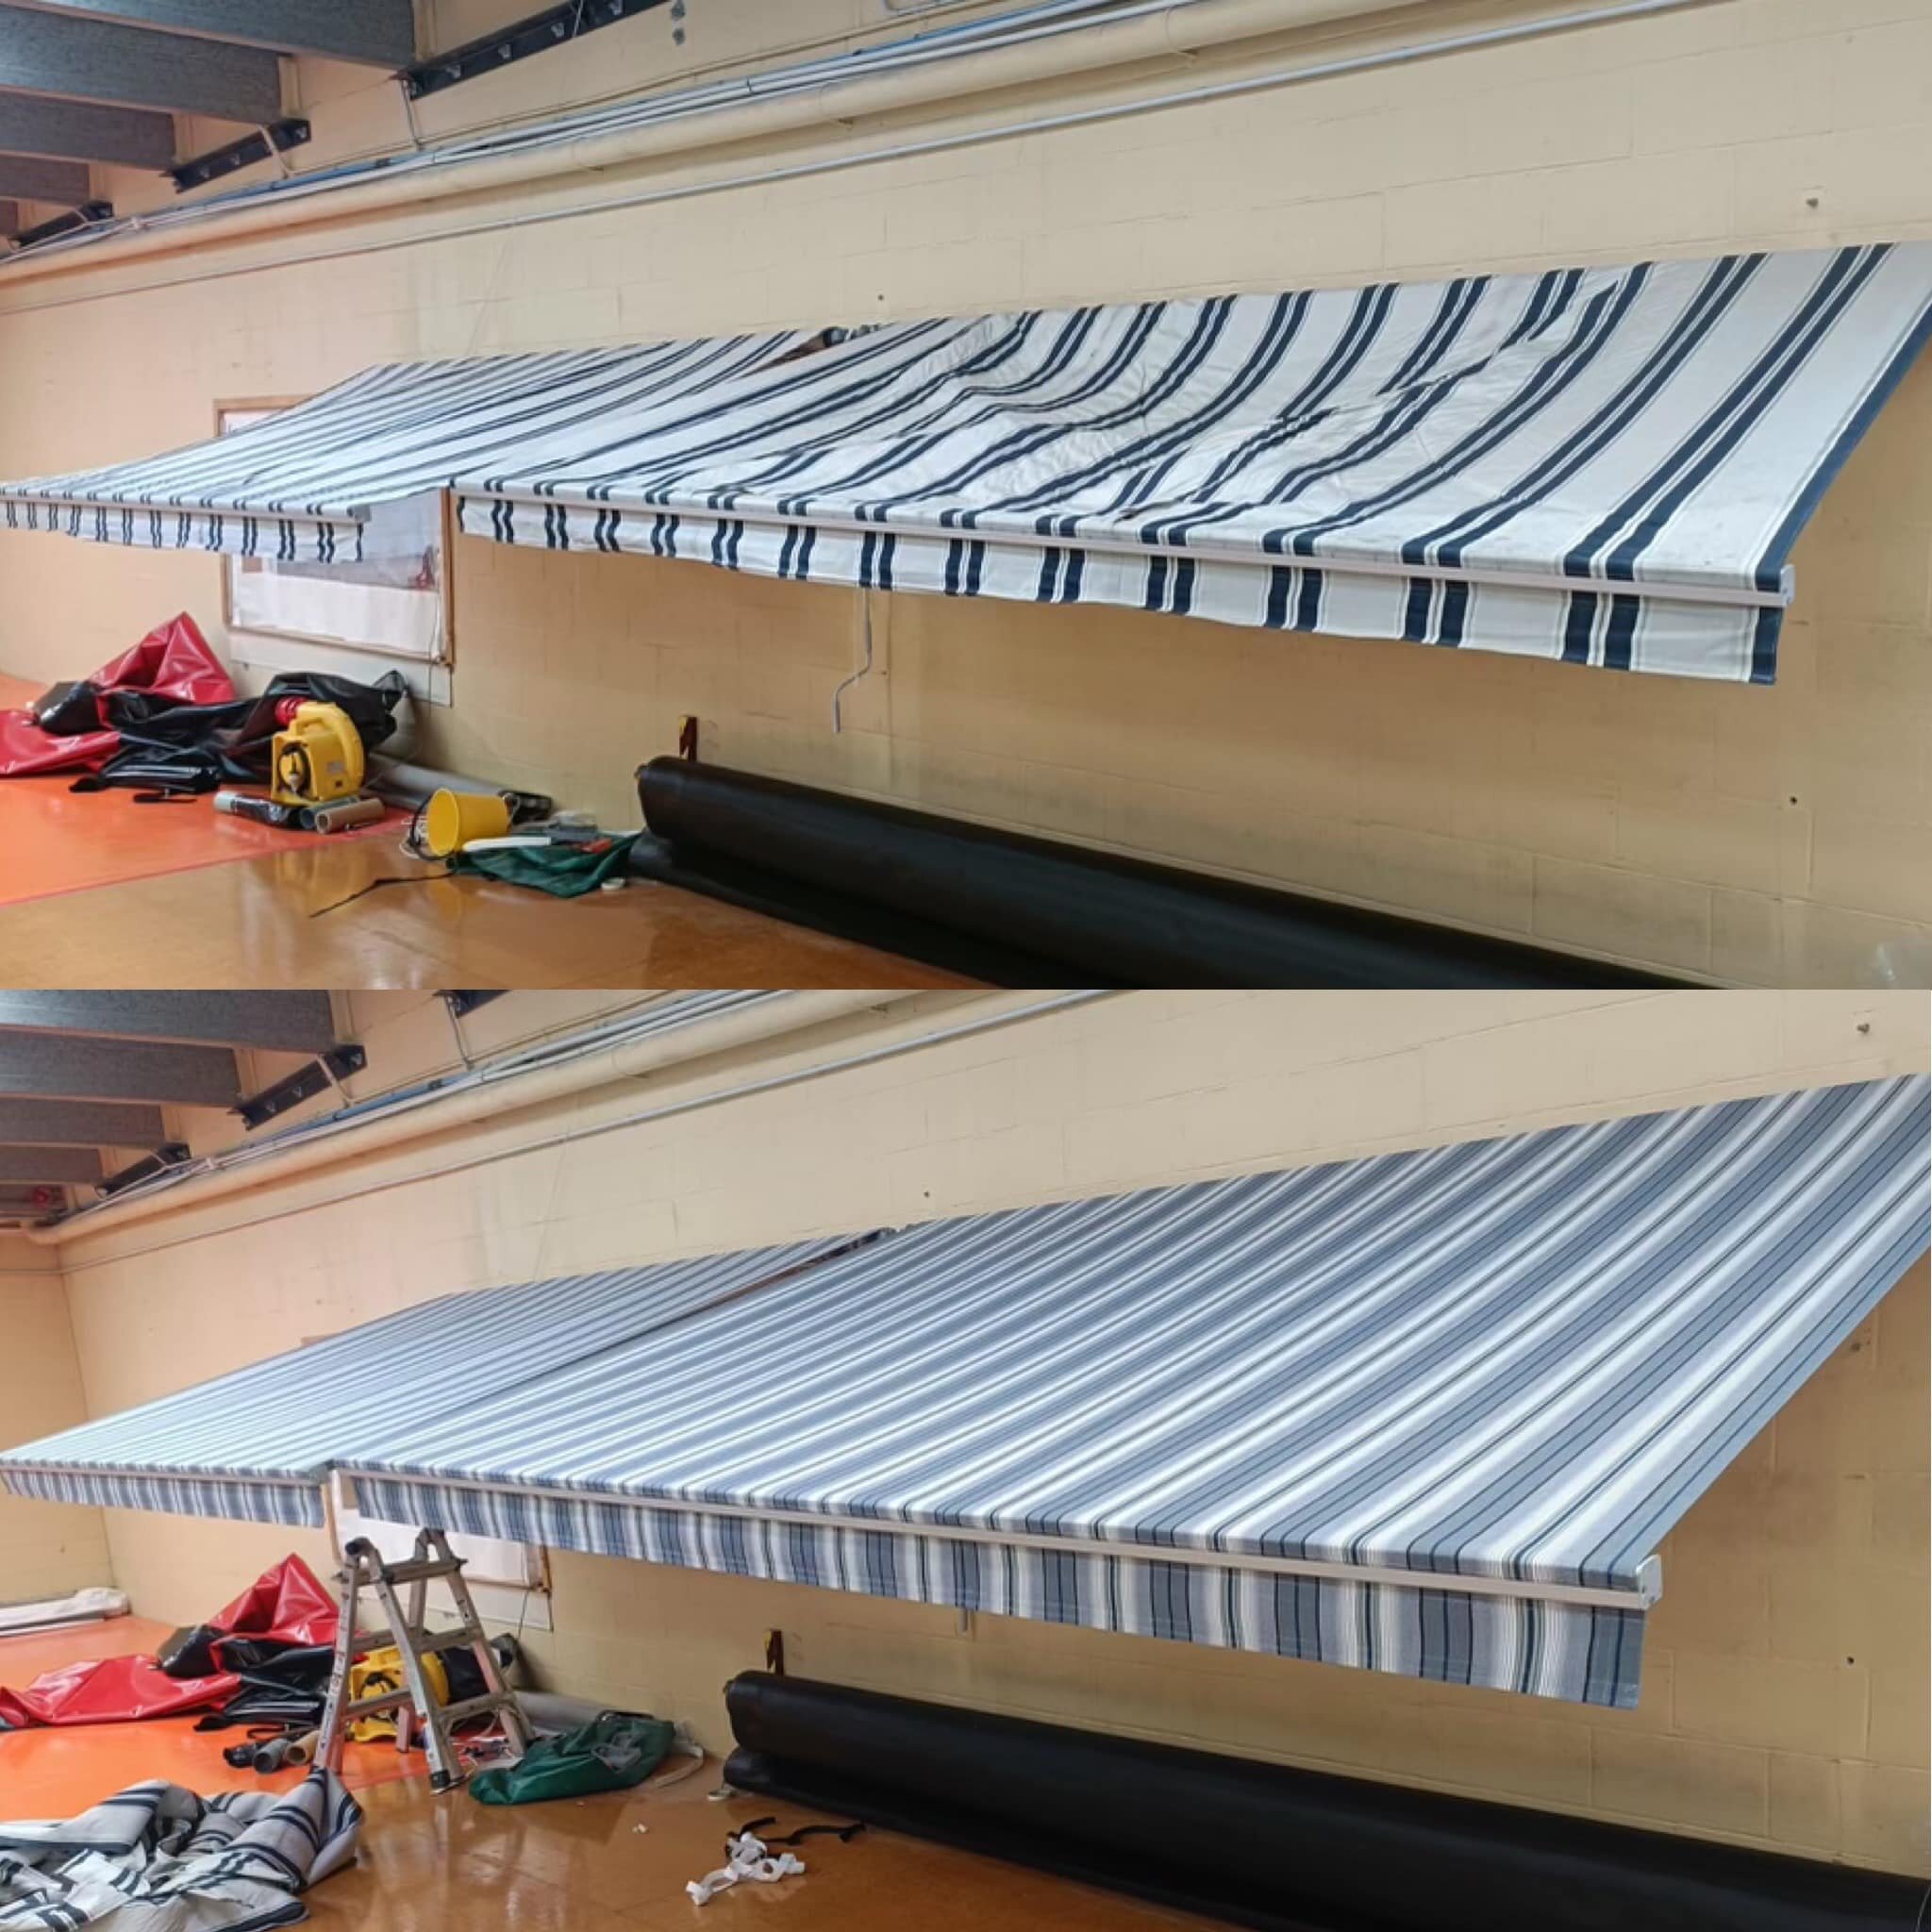 Check out this recently completed awning reskin 🙌
This is a super popular service we offer, that enables you to give your existing awning a refresh. 
Whether you&rsquo;ve had your awning for 10+ years and it needs a modern touch, or you&rsquo;ve bro